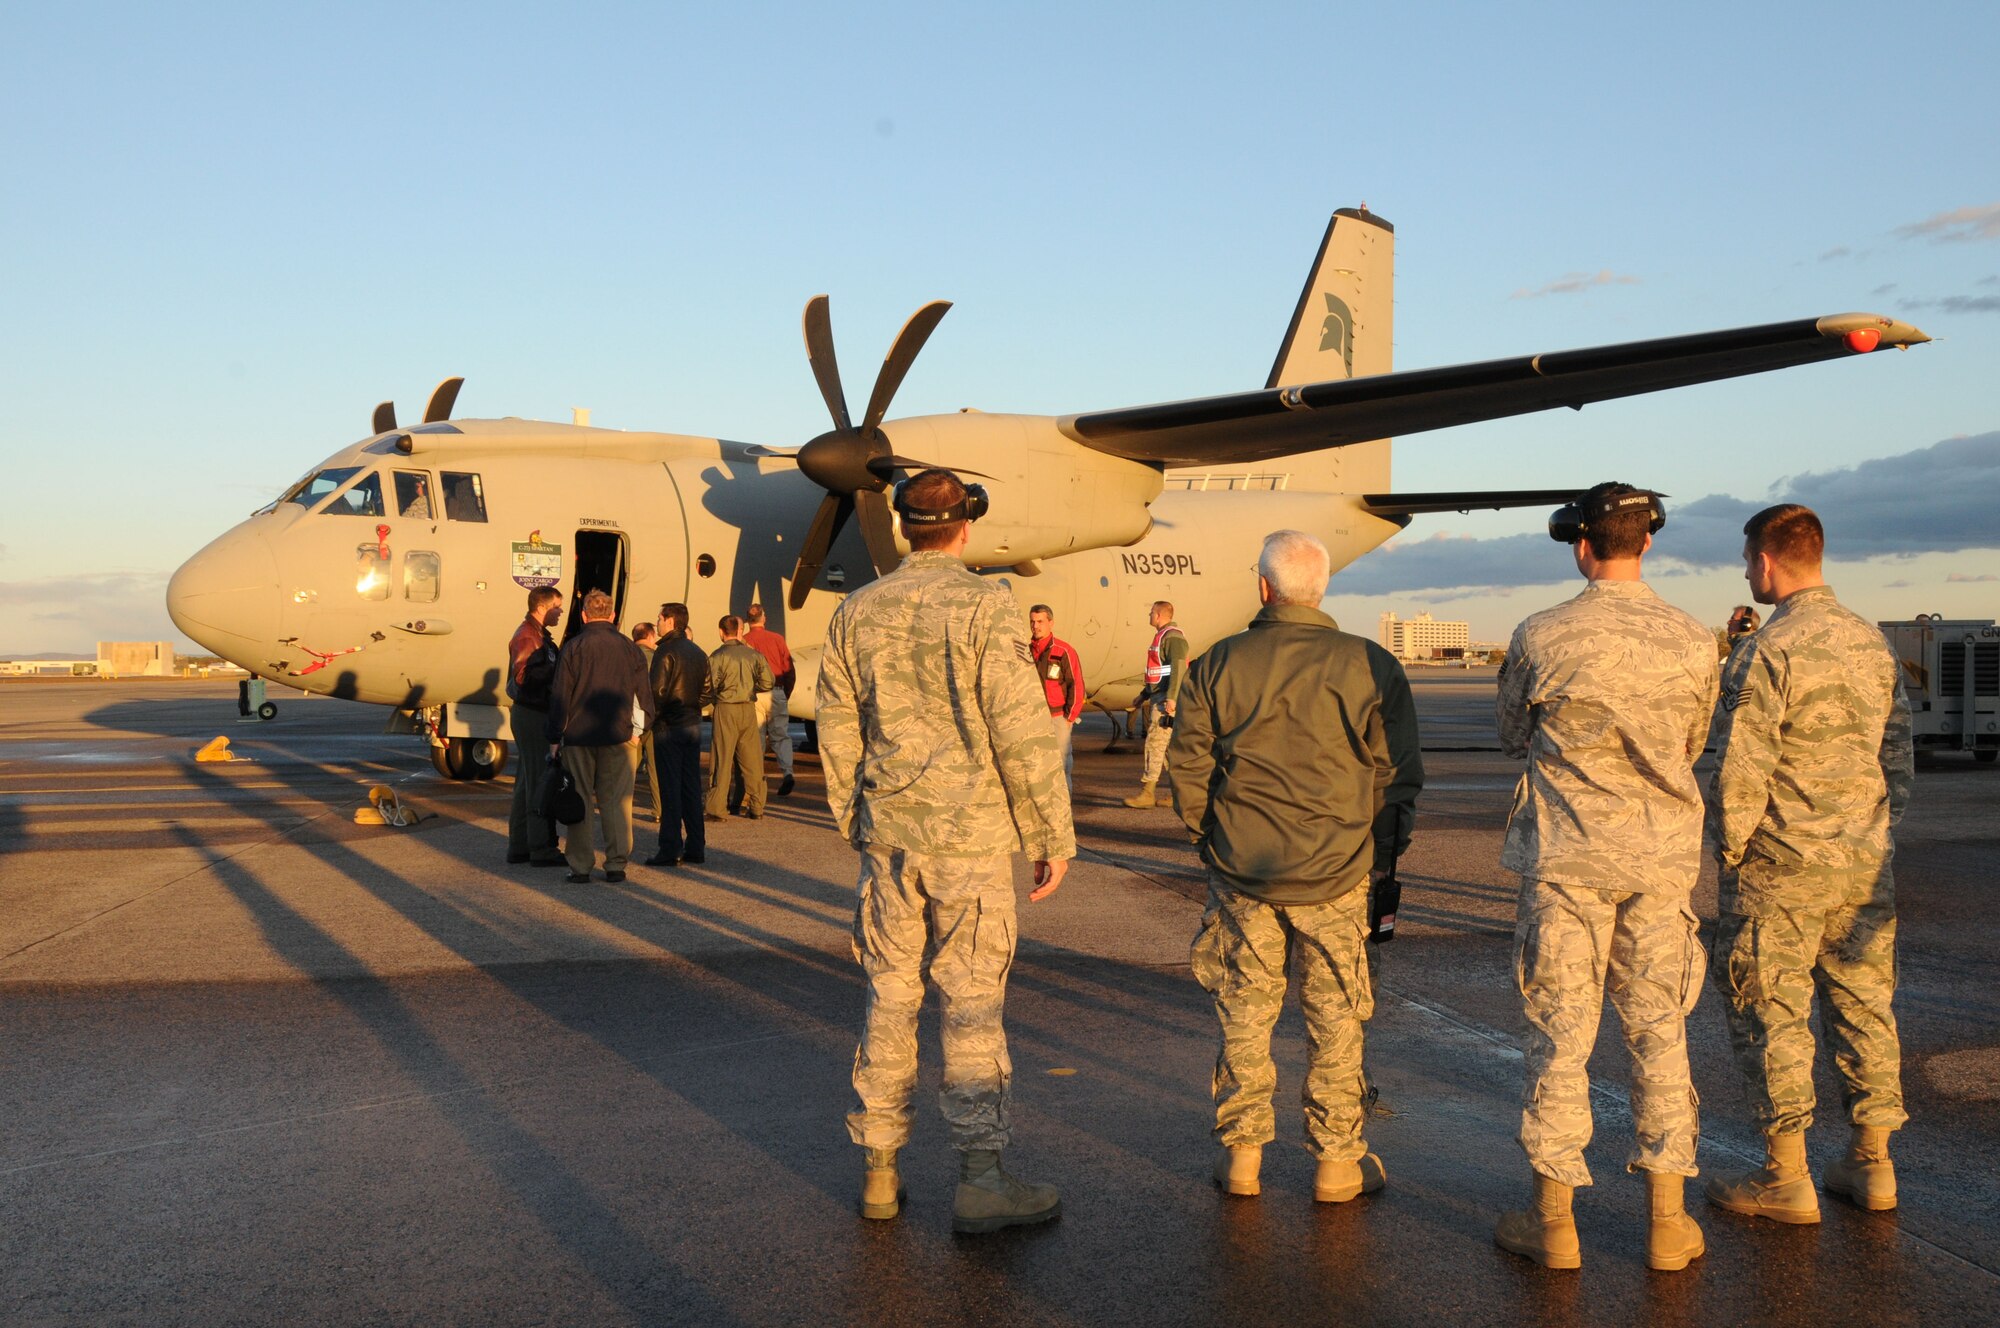 Members of the 103rd Airlift Wing observe the new C27J Spartan upon its arrival to the Bradley Air National Guard Base in East Granby, Conn. on Thursday, Oct. 21, 2010.  The aircraft visit afforded the Flying Yankees of the 103rd Airlift Wing an opportunity to experience its future mission capabilities first hand.  (U.S. Air Force photo by Tech. Sgt. Erin E. McNamara)